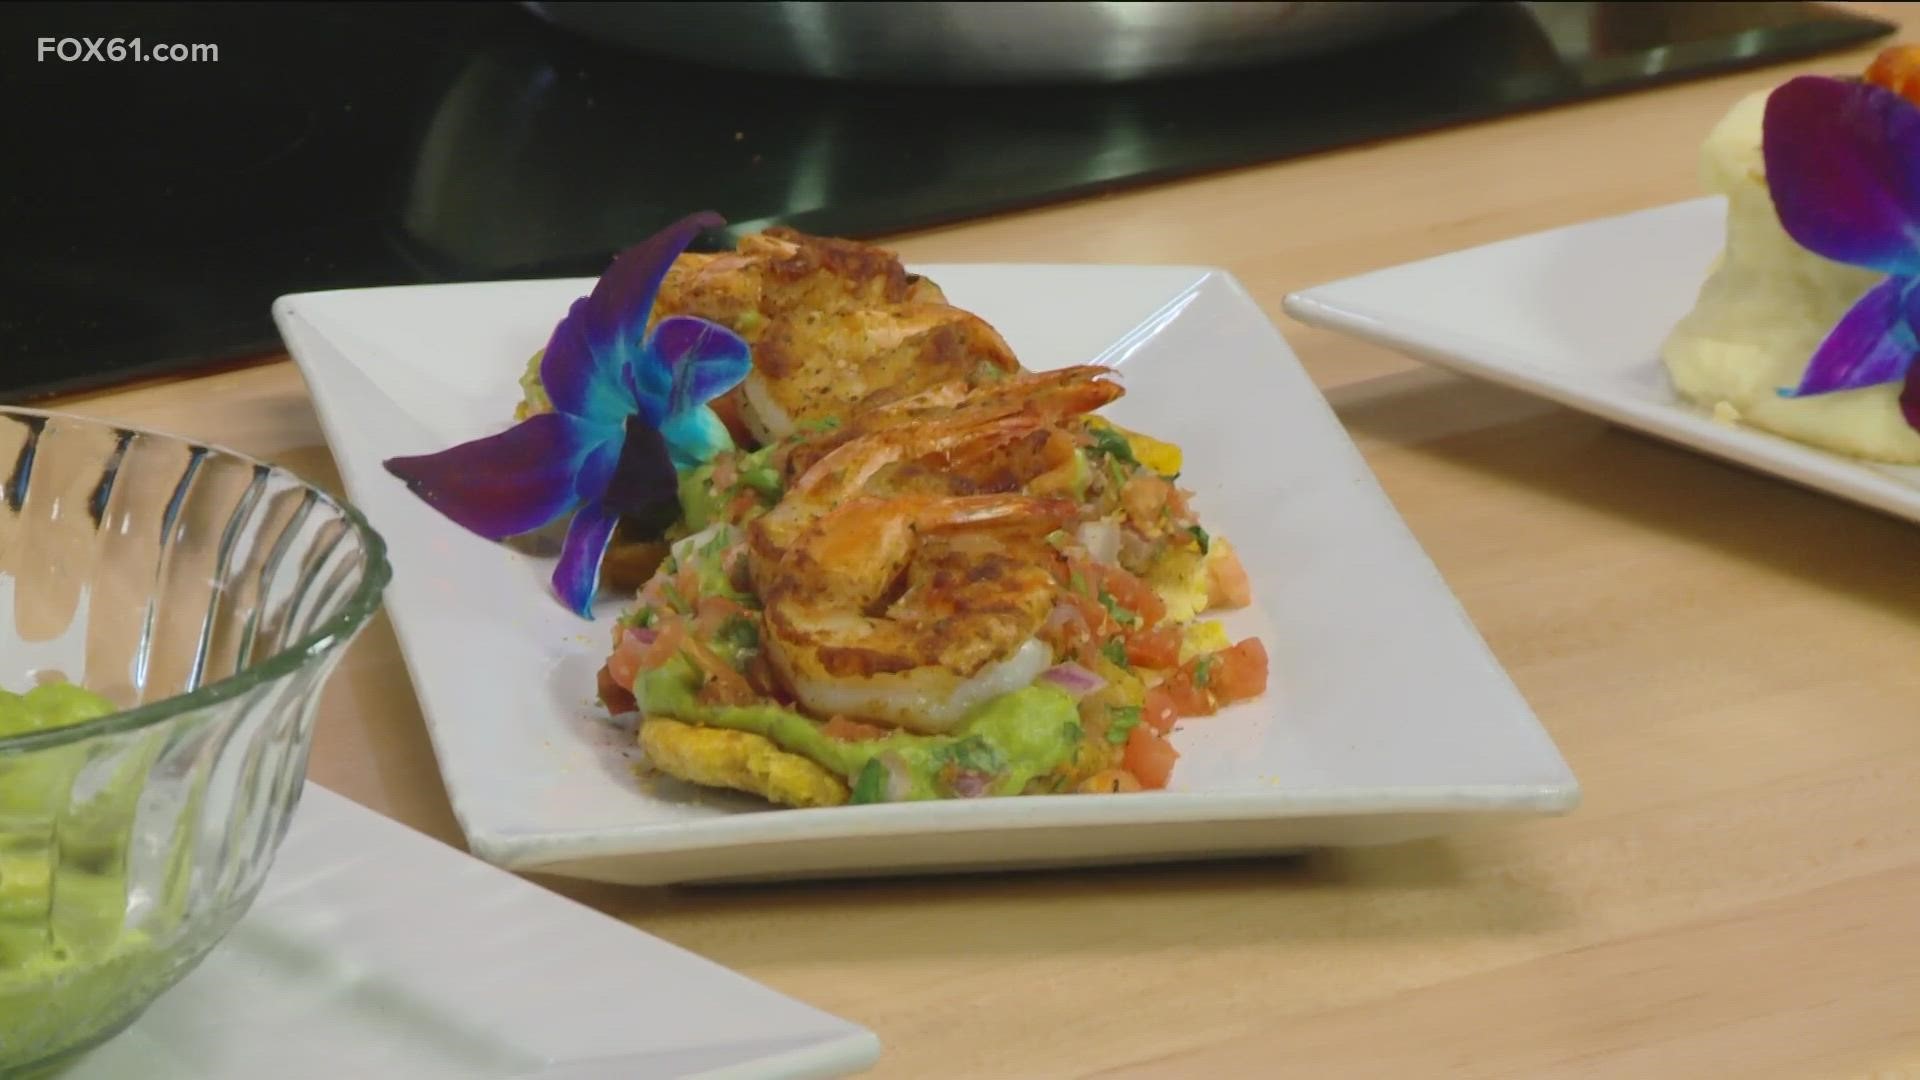 Owner Jeromy Miles and Executive Chef Allen Brown of Soulbaila show us how to make delicious Cajun shrimp tostones that are sure to warm you up on a damp winter day.